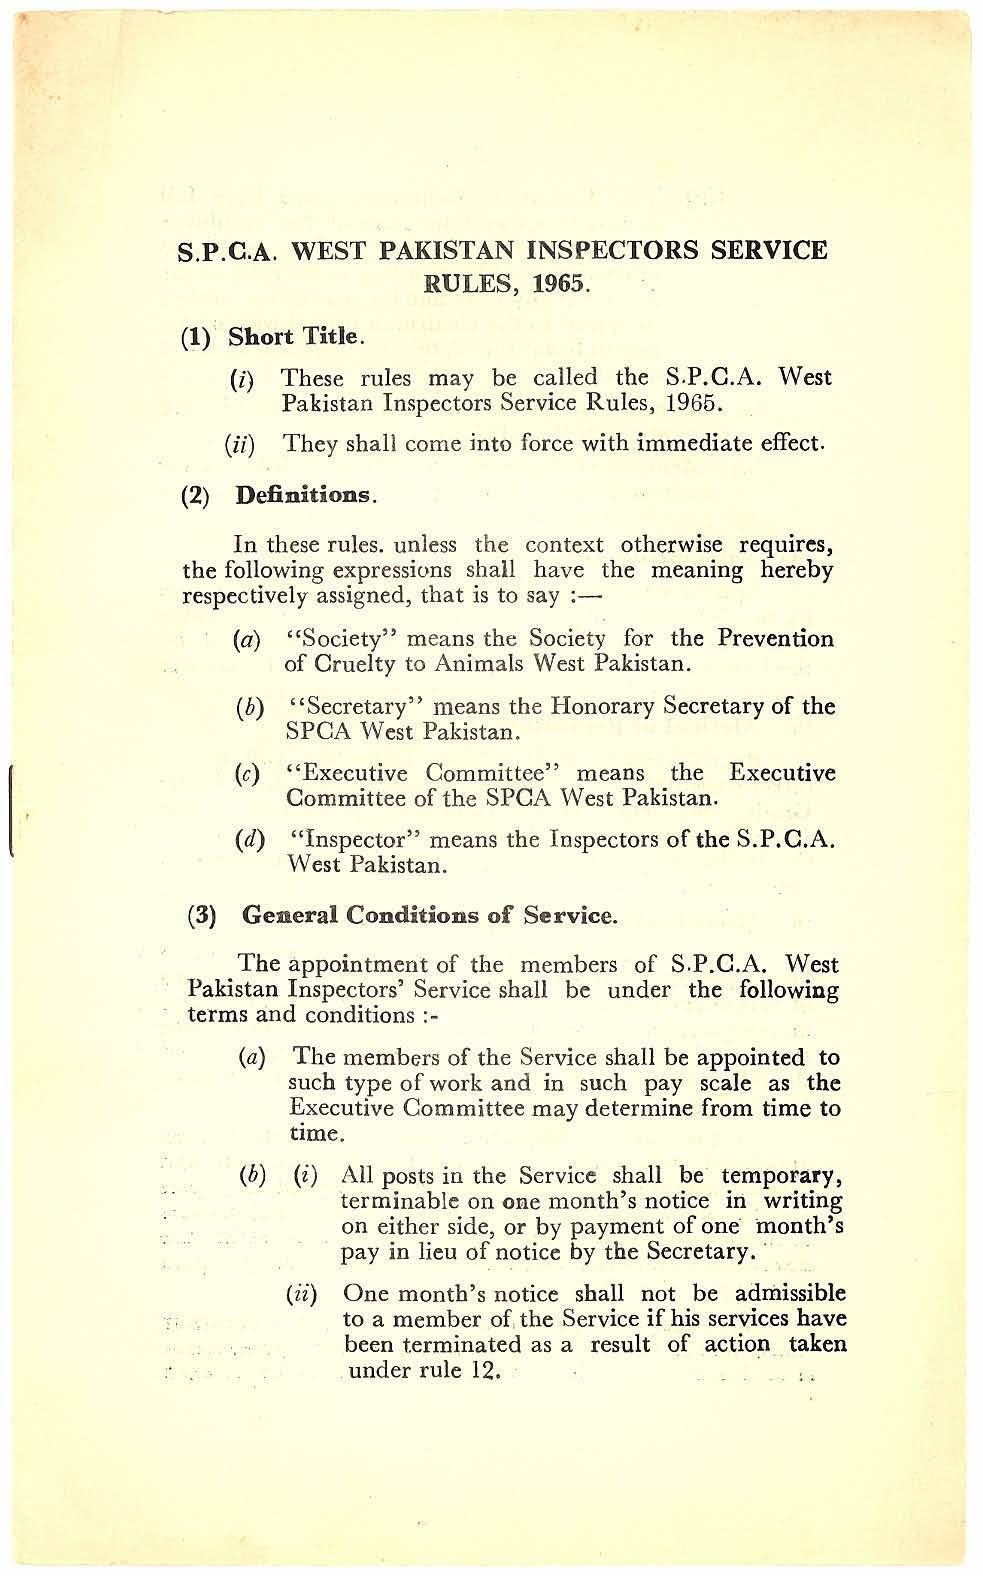 S.P.C.A. WEST PAKISTAN INSPECTORS SERVICE RULES, 1965. (1) Short Title. (i) (ii) These rules may be called the S.P.G.A. West Pakistan Inspectors Service Rules, 1965. (2) Definitions.